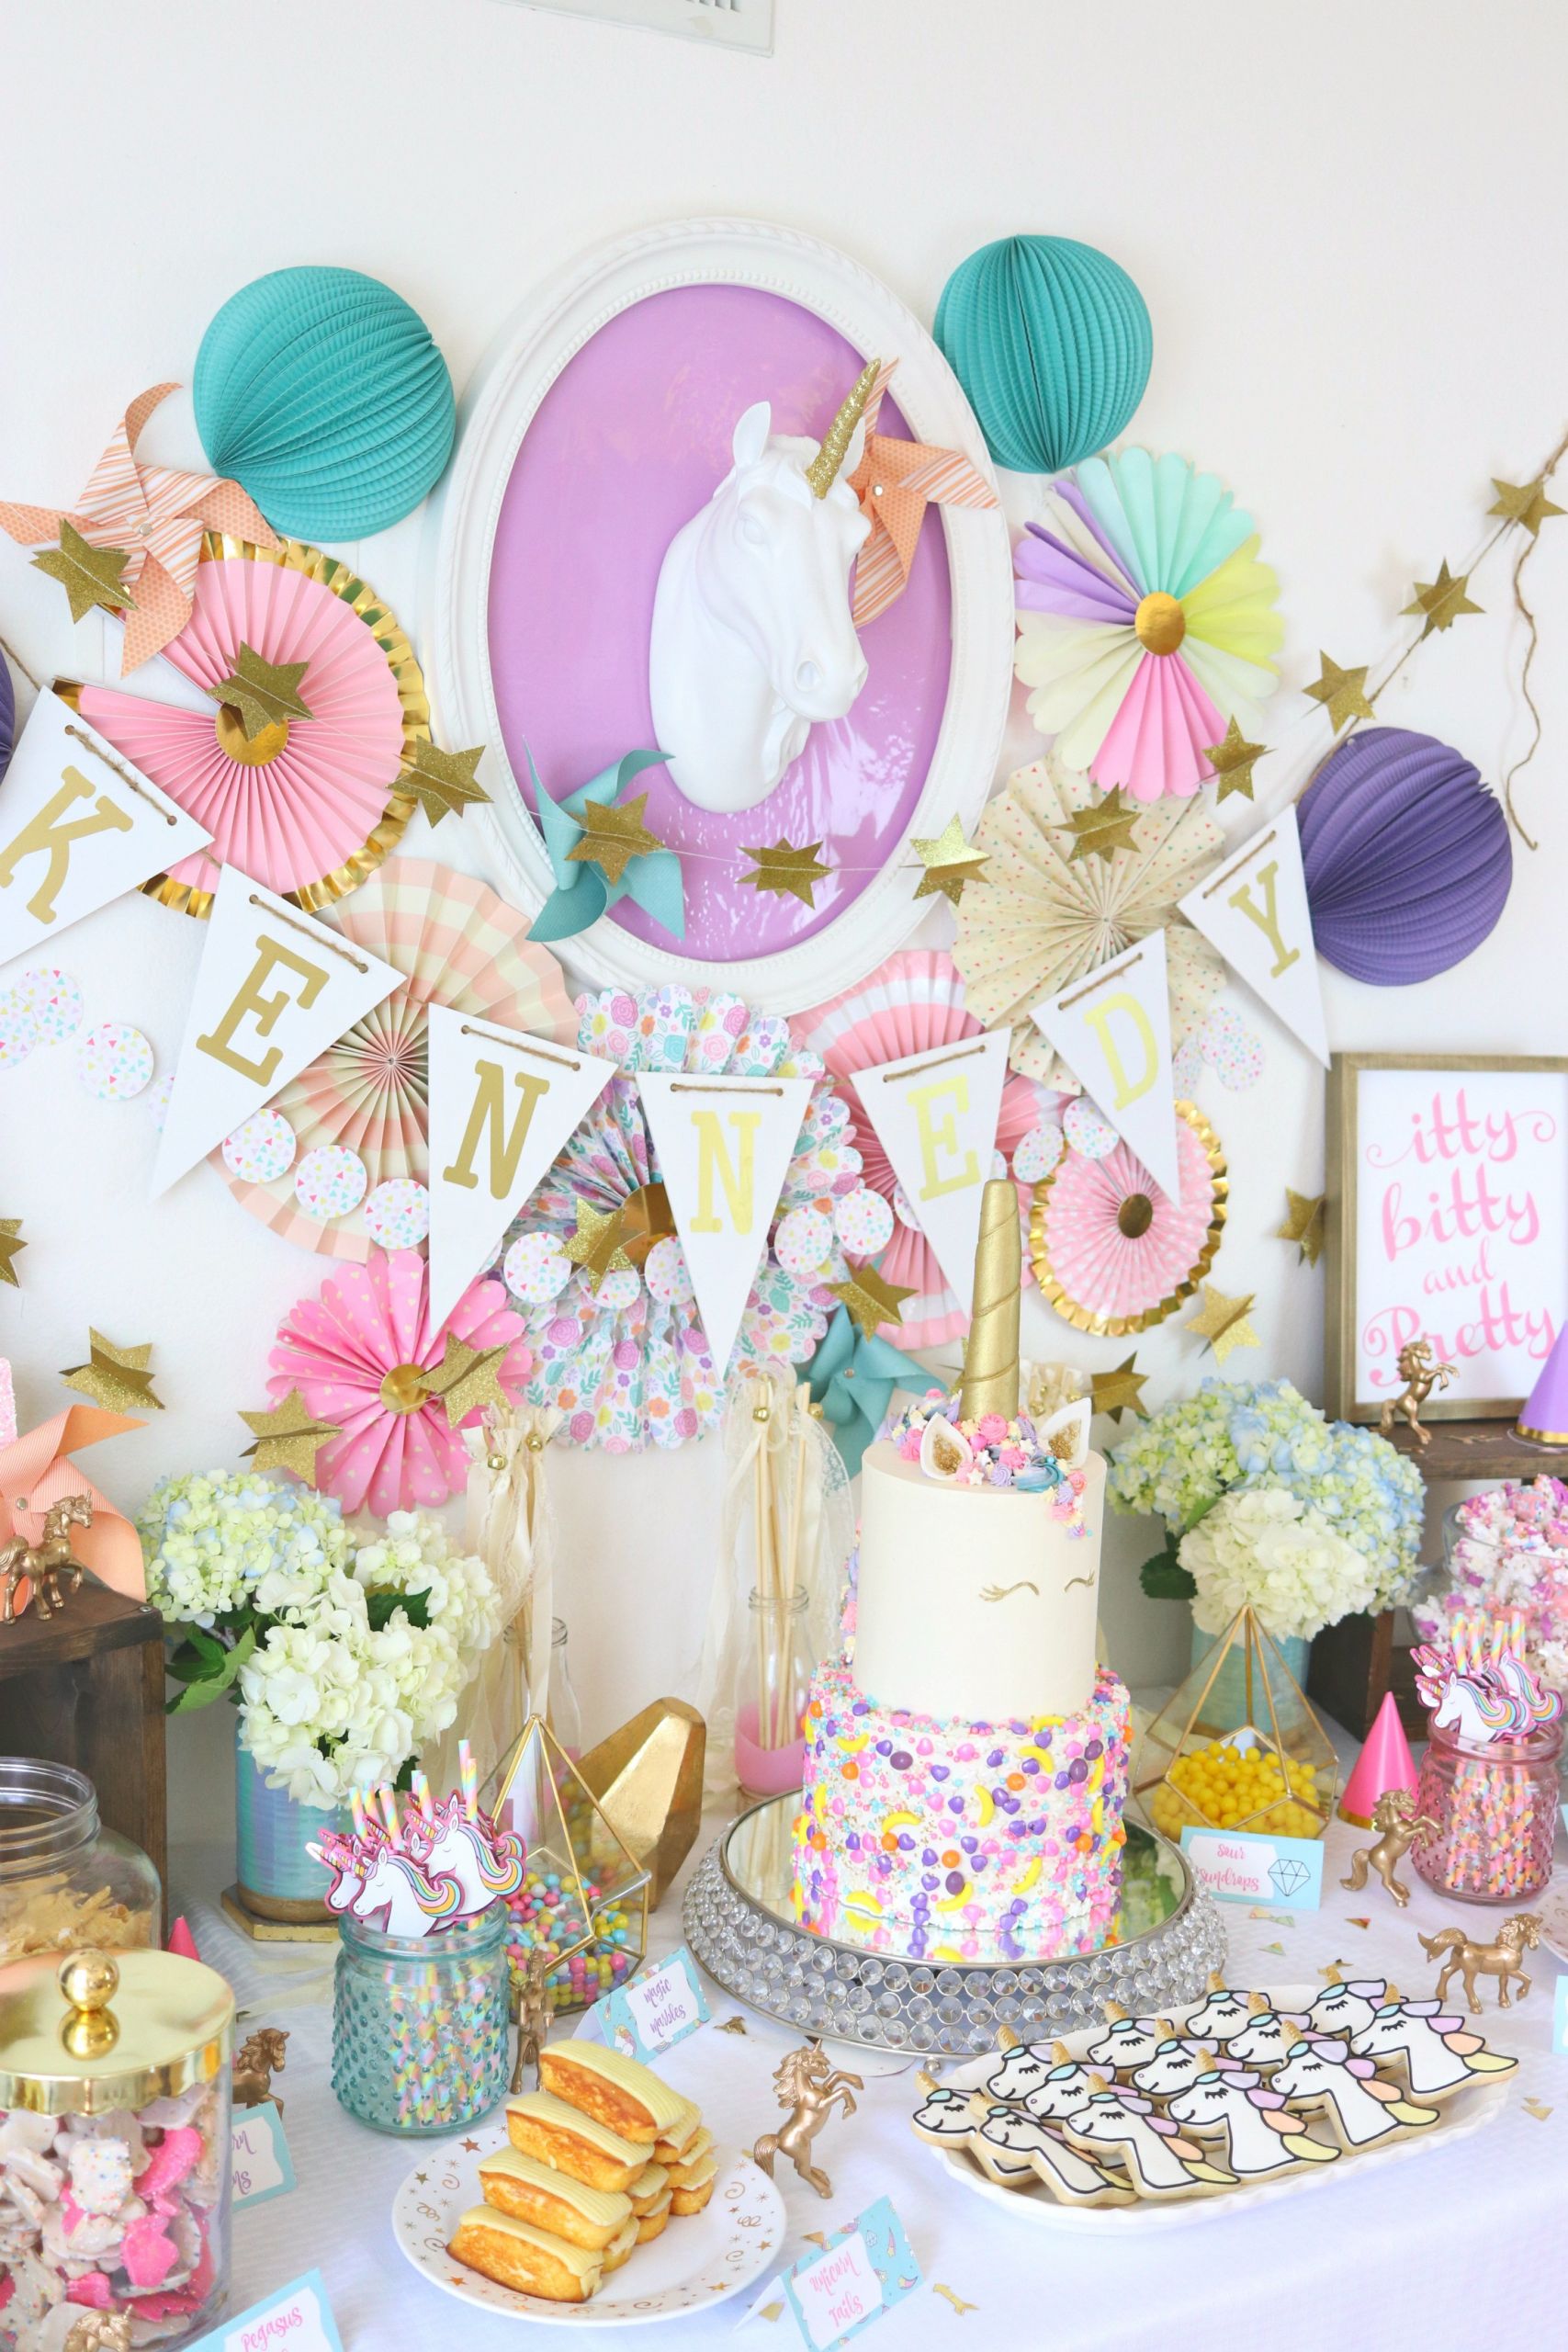 Girls Birthday Decorations
 The Ultimate Unicorn Birthday Party Every Girl Will Love